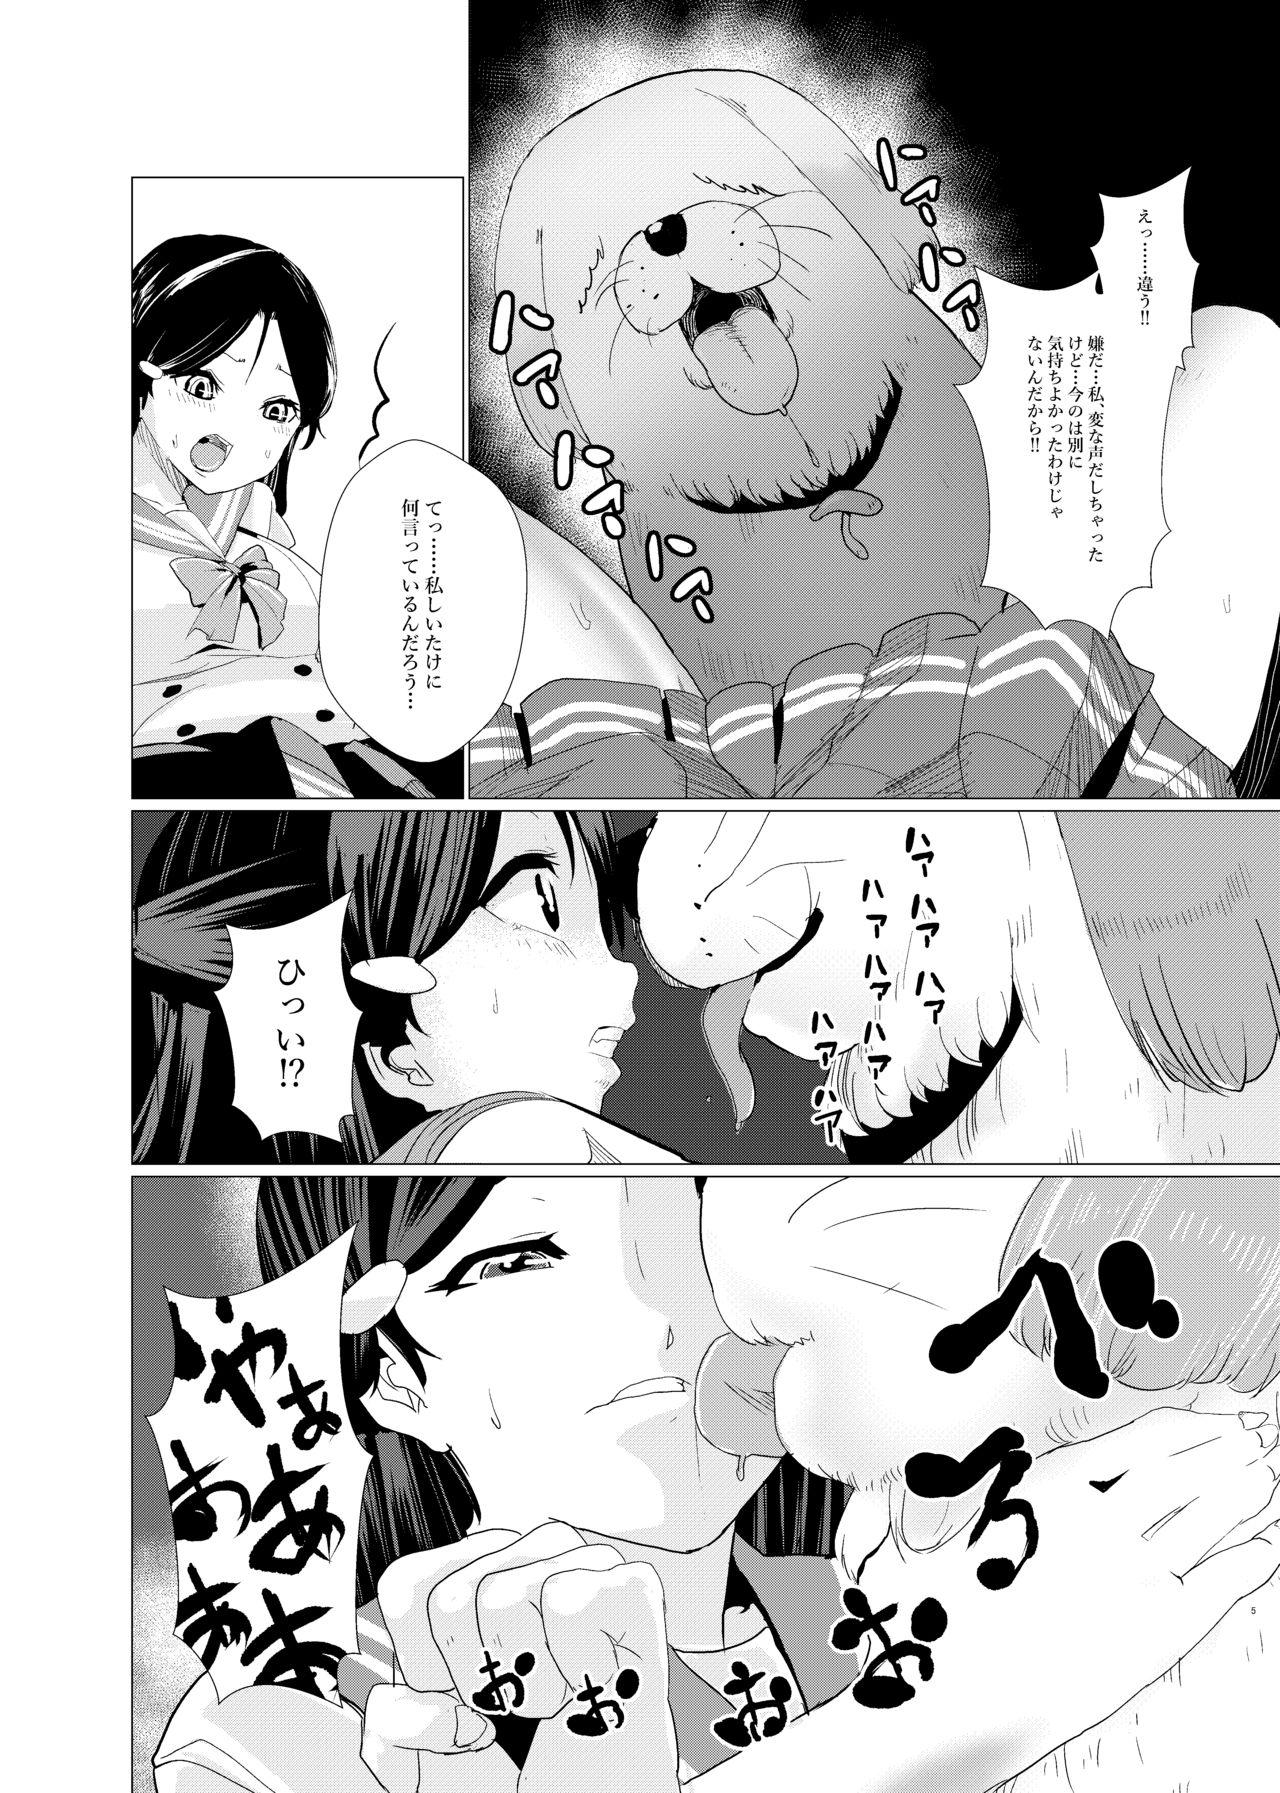 Transexual Star Guard Dog - Love live Coed - Page 7